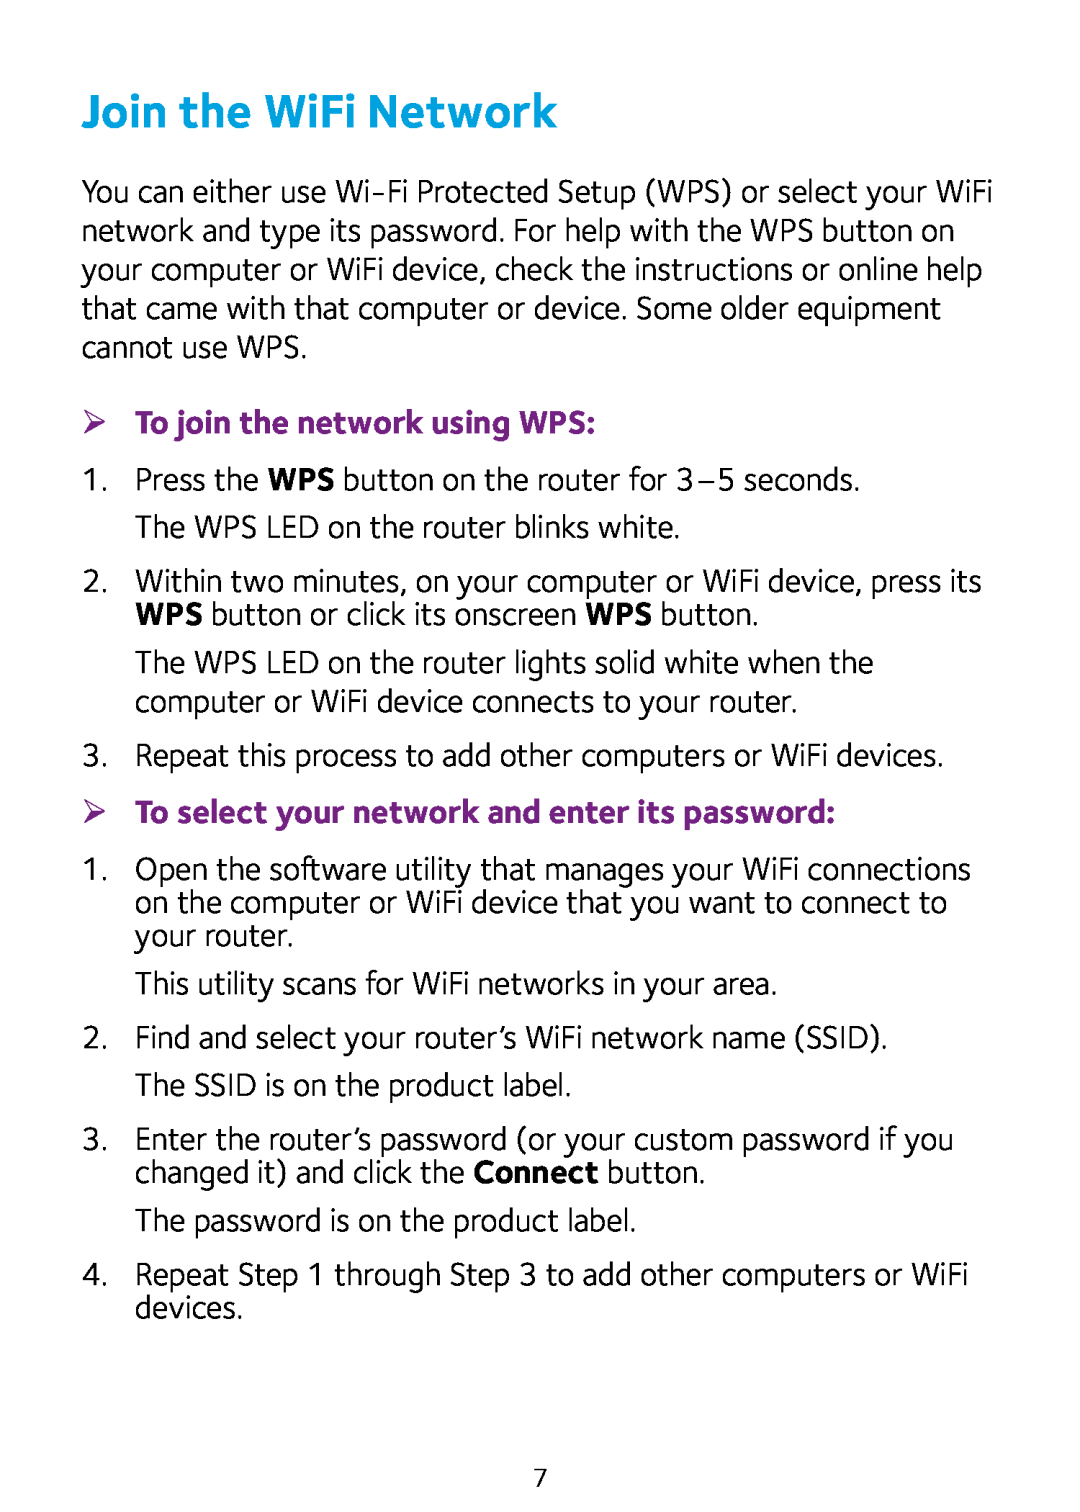 NETGEAR R8000 Join the WiFi Network, ¾¾ To join the network using WPS, ¾¾ To select your network and enter its password 